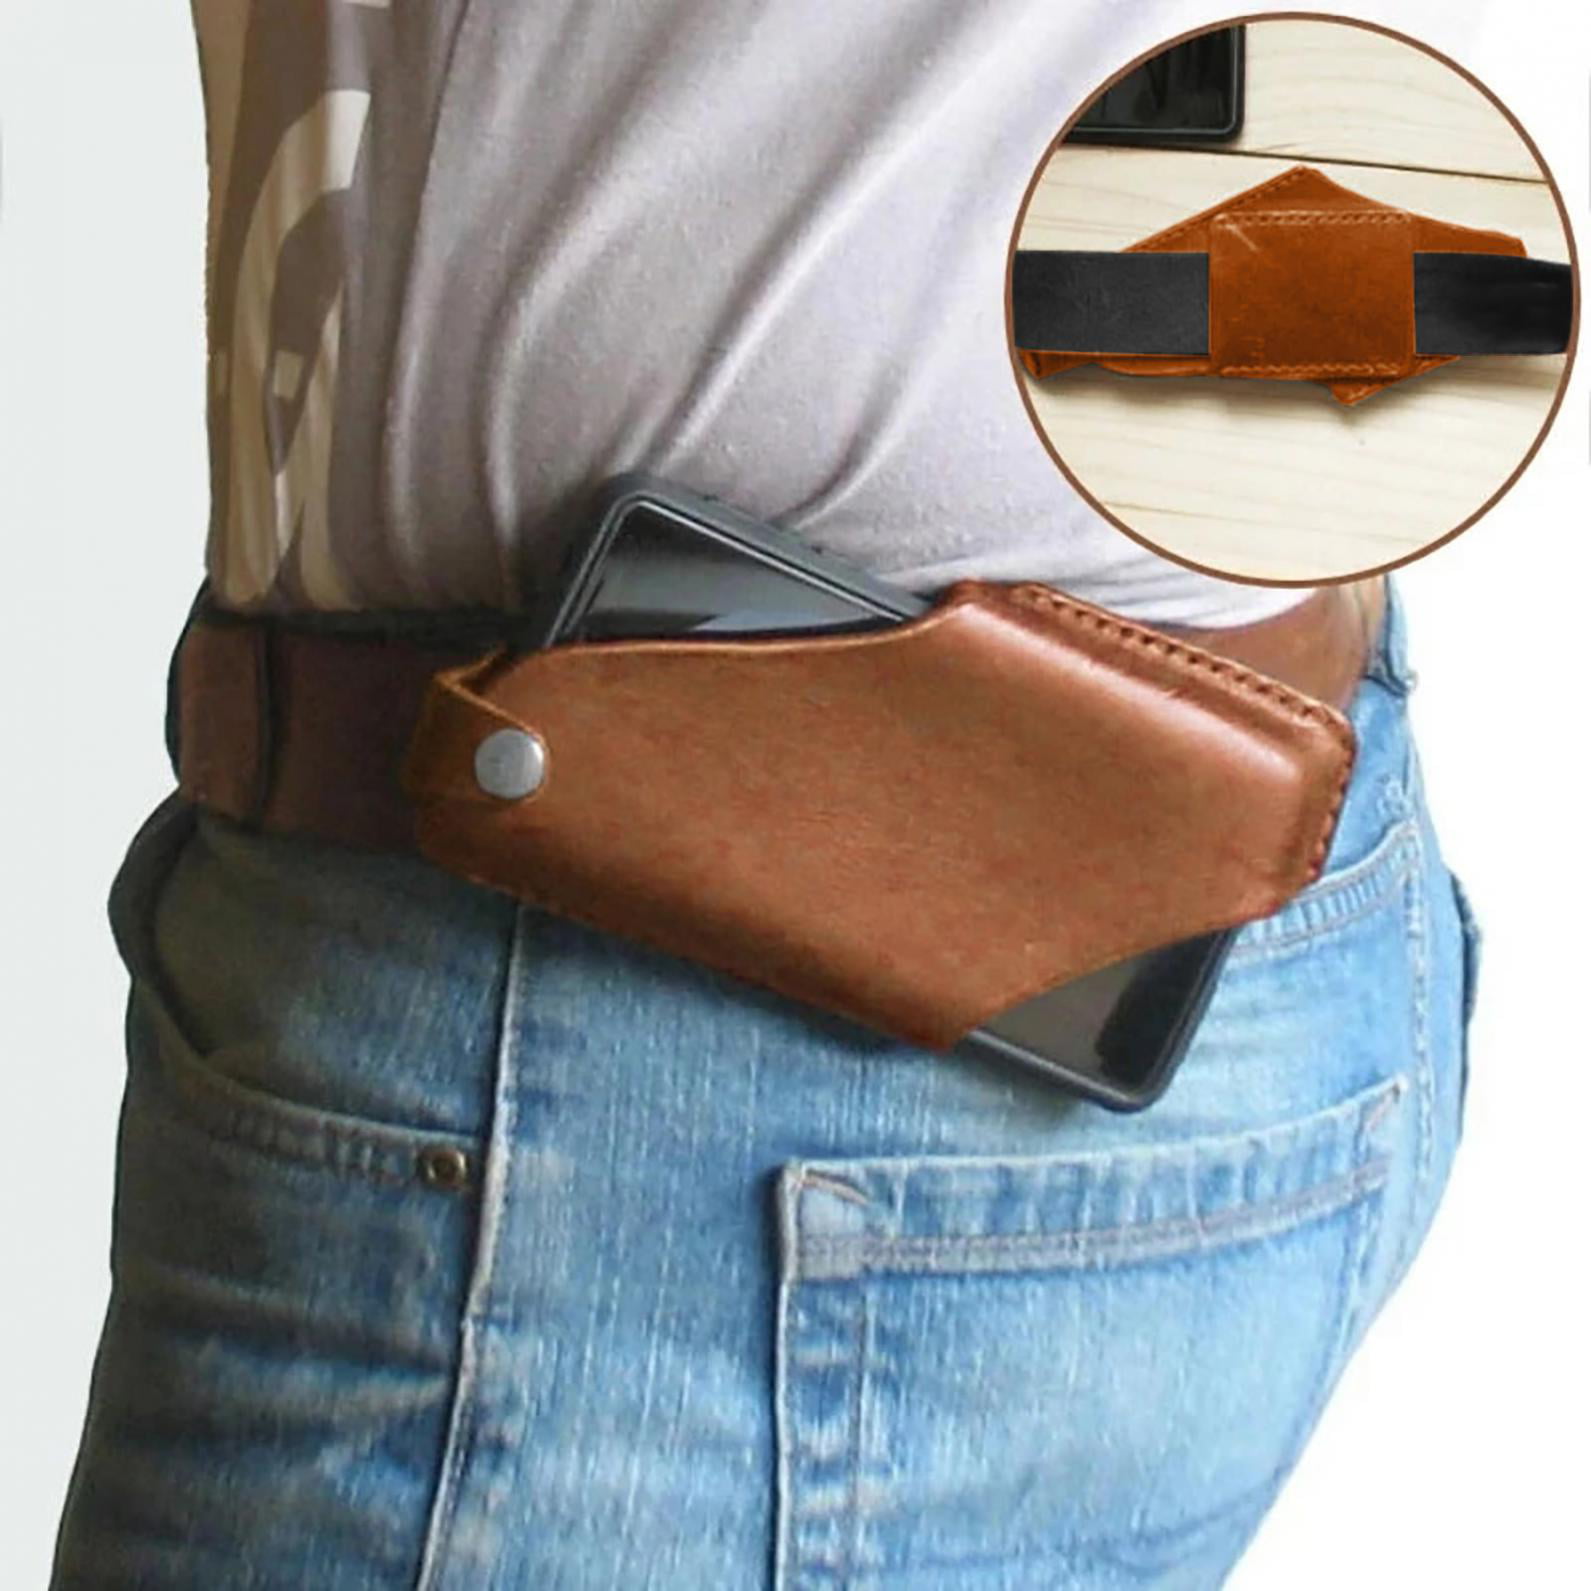 JOYIR Genuine Leather Cell Phone Holster Case with Belt Loop Pouch